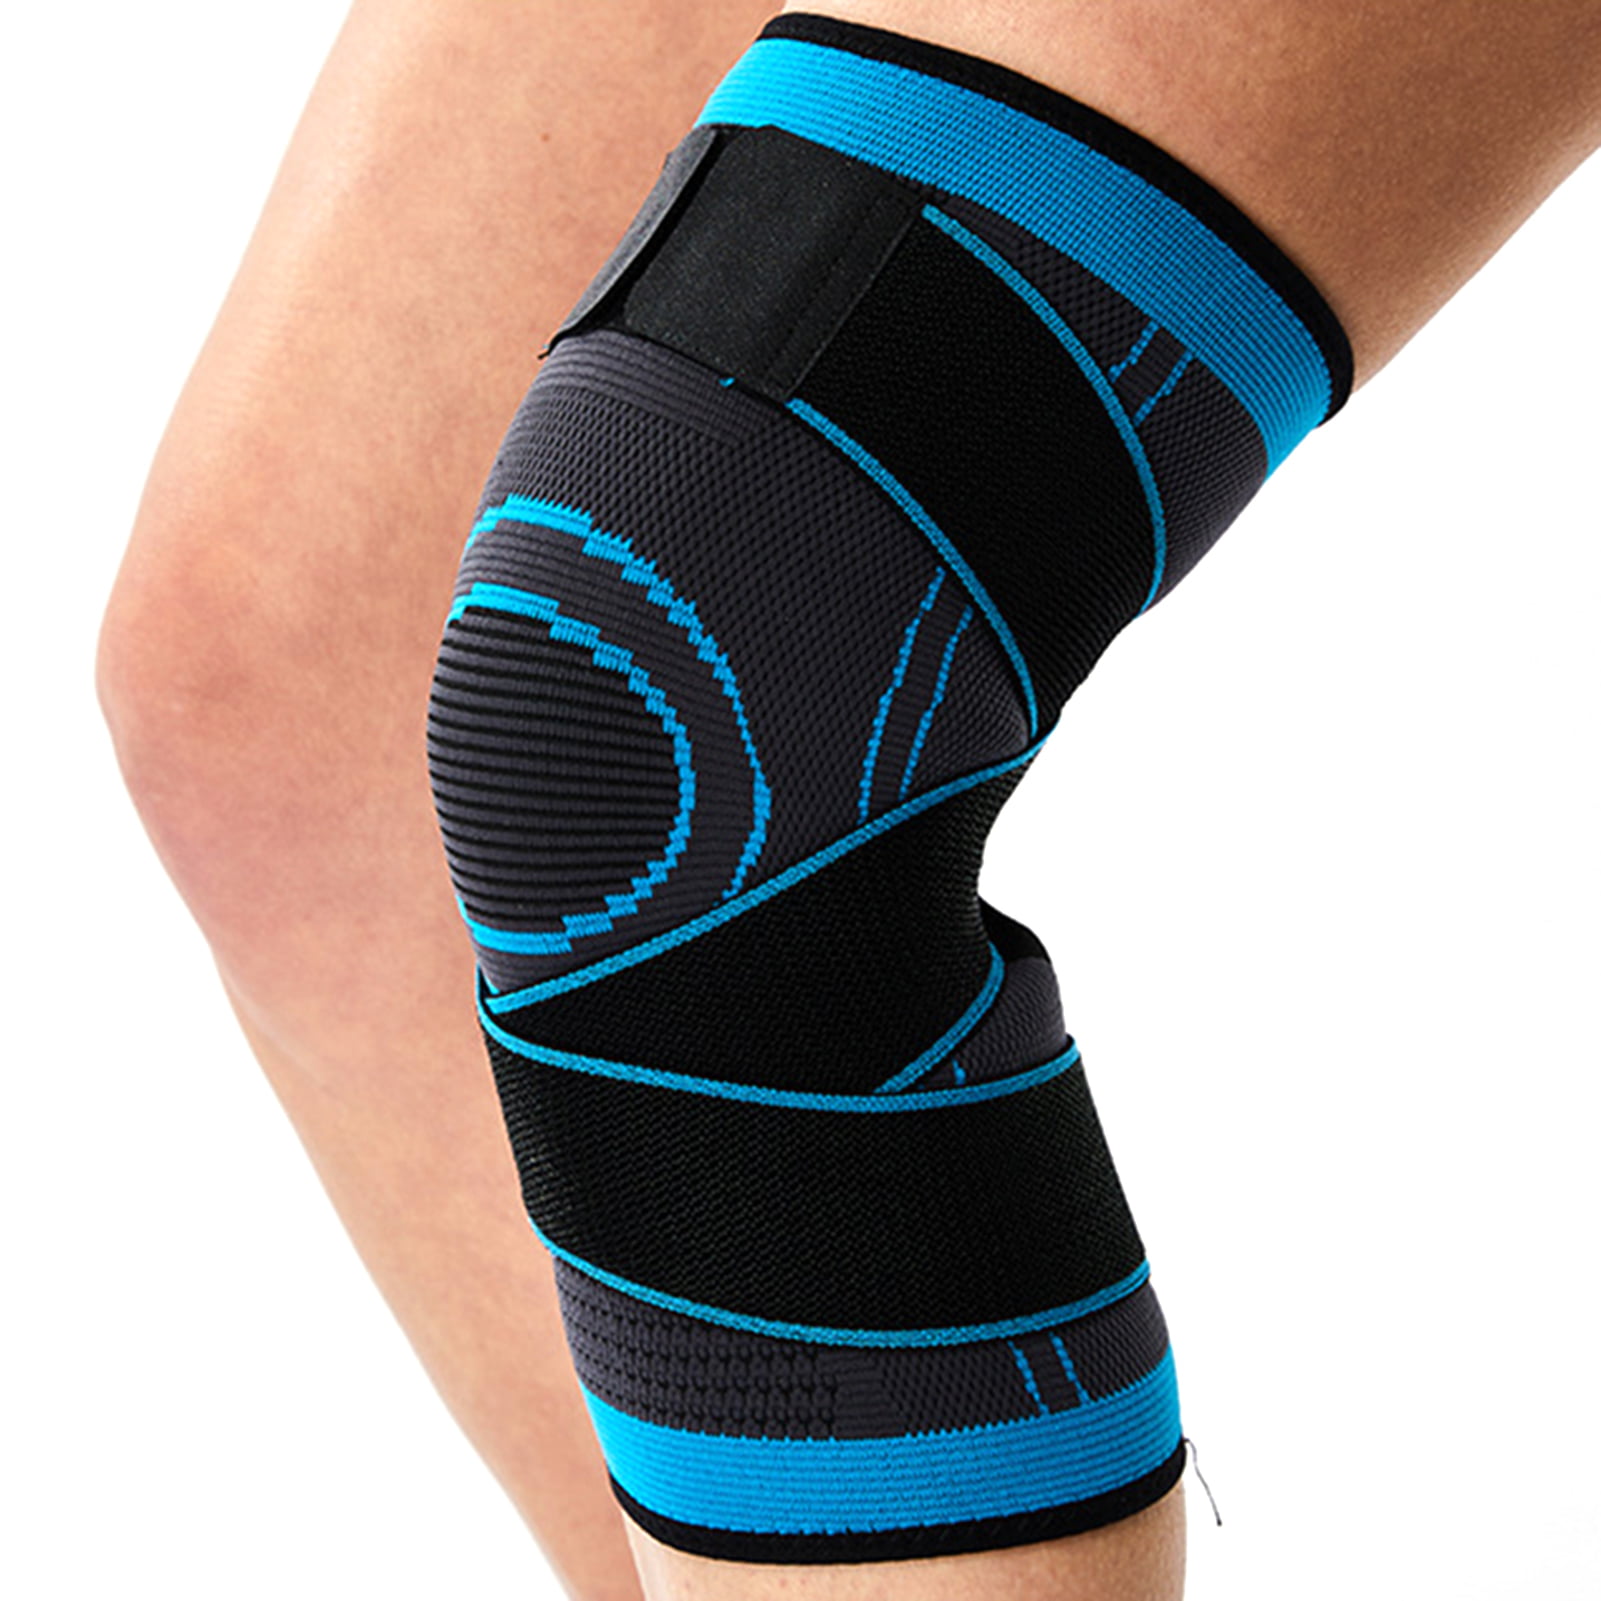 Children's Sport Knee Pad Fitness Running Cycling Knee Support Braces LC 